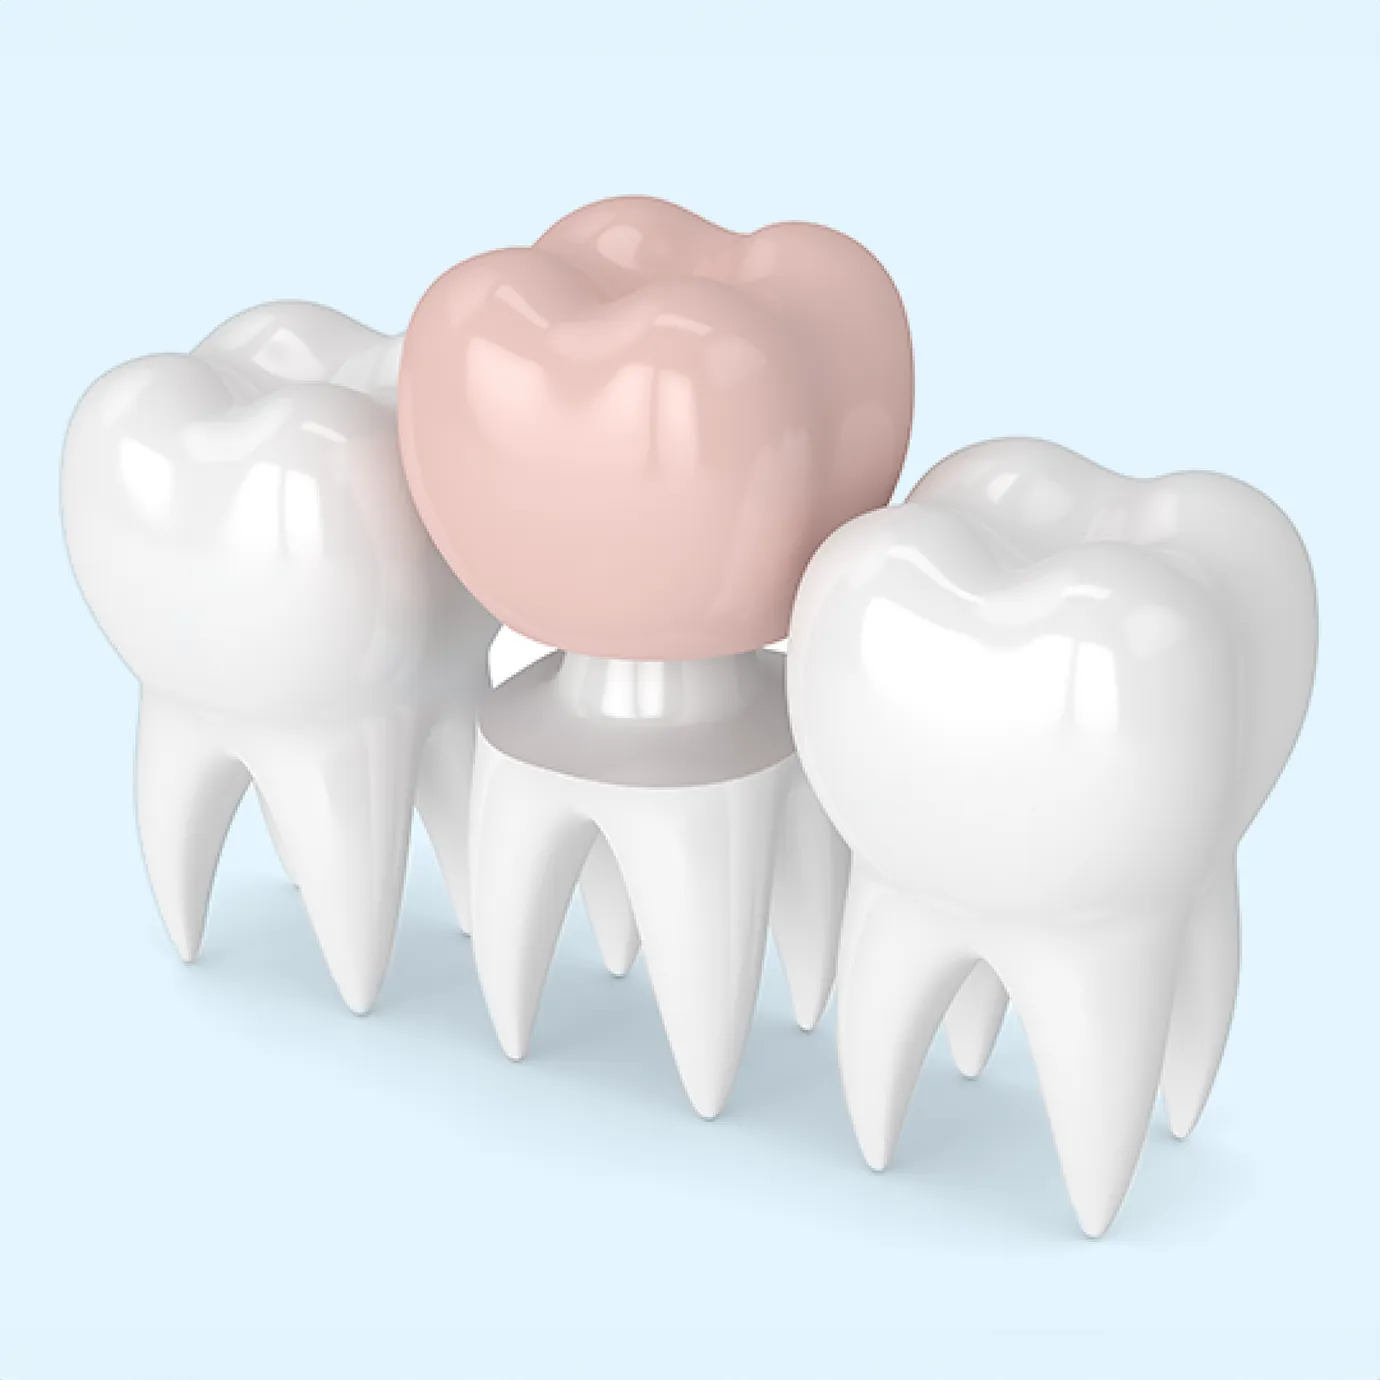 Dental crown replacement